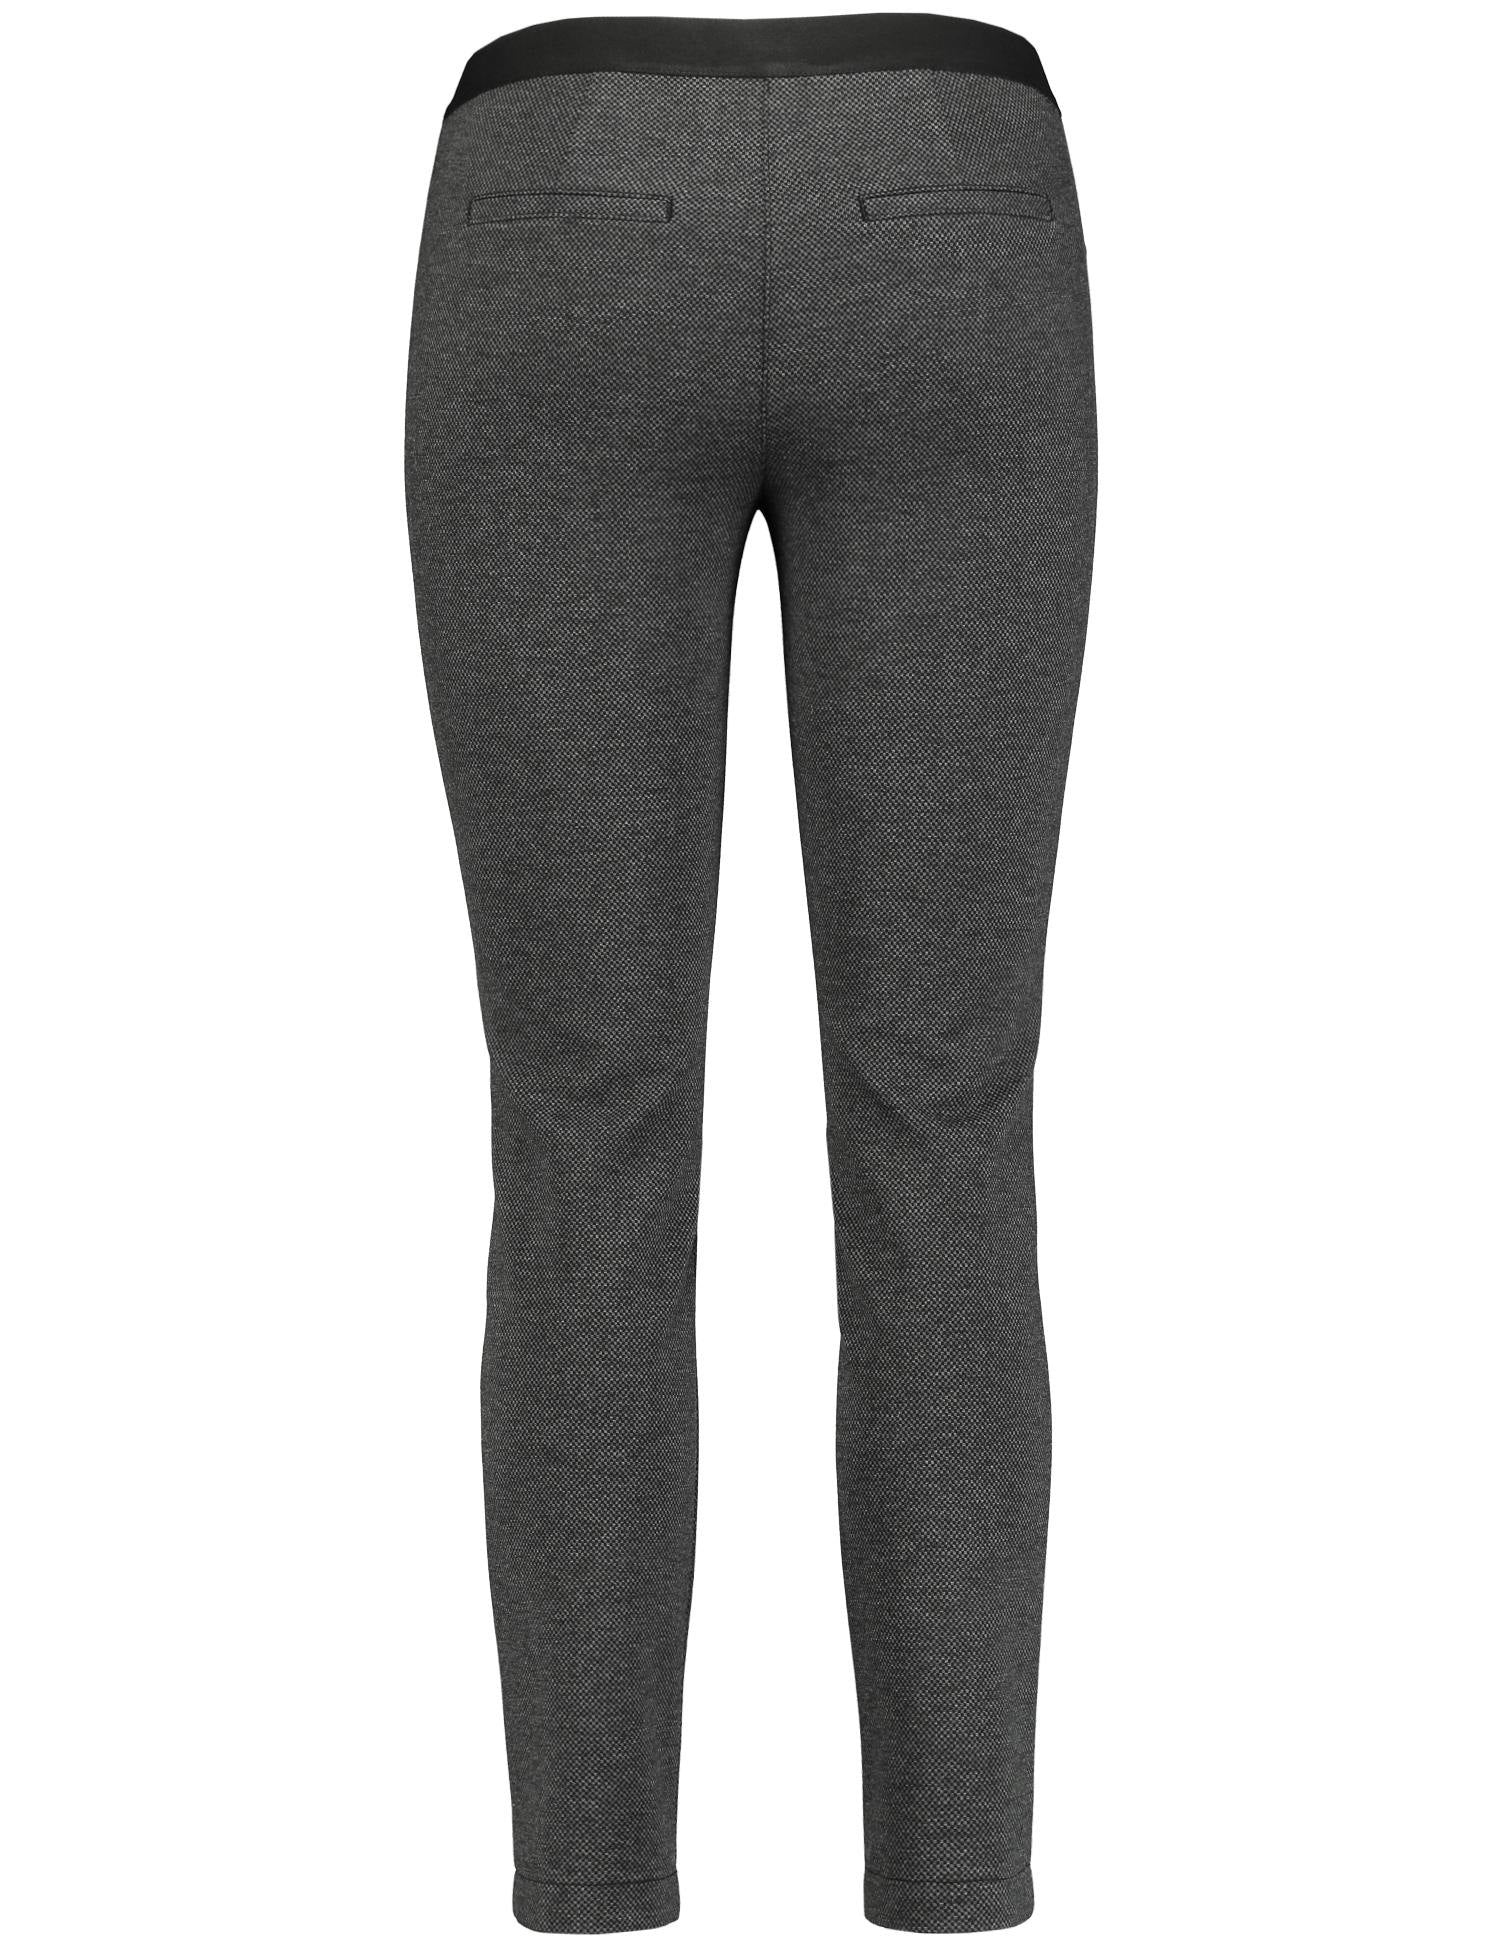 Two-Tone Texture Trousers by Gerry Weber at Jophiel